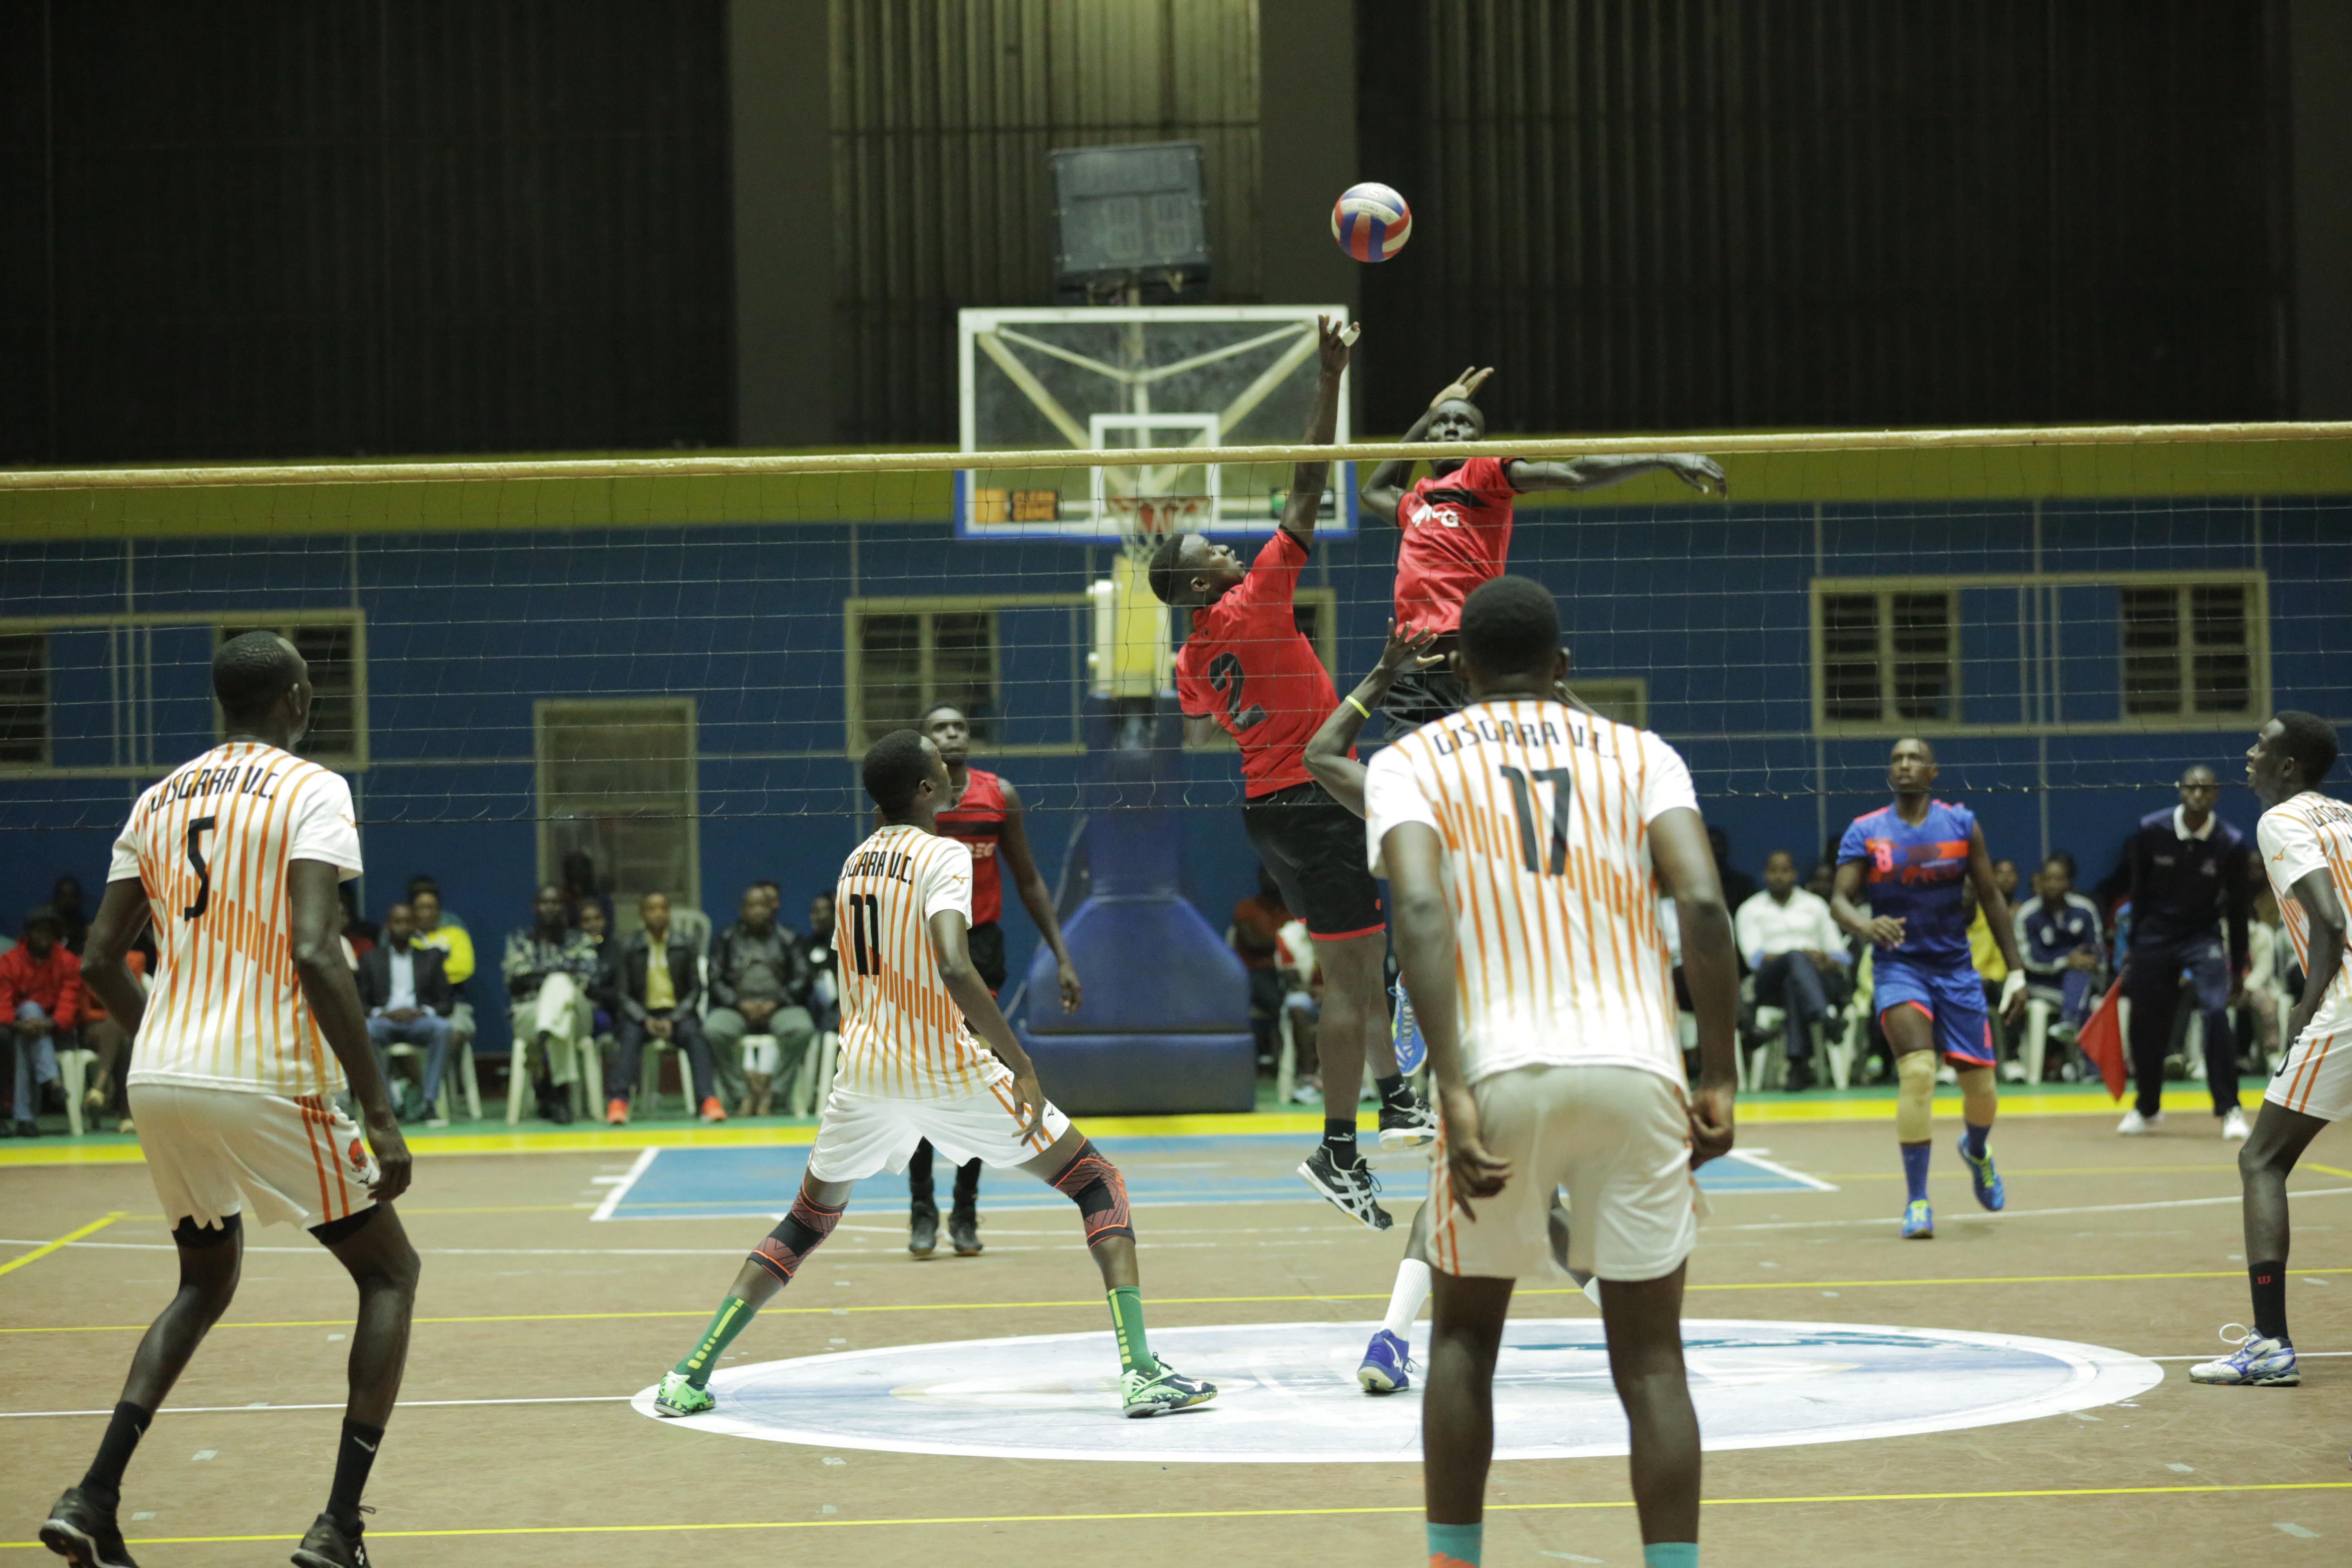 REG Volleyball players in action during a past game against Gisagara at Amahoro indoor stadium. Both clubs will represent Rwanda in the menu2019s African Club Championships slated in Tunis, Tunisia from May 5-18. Photo: Craish Bahizi.